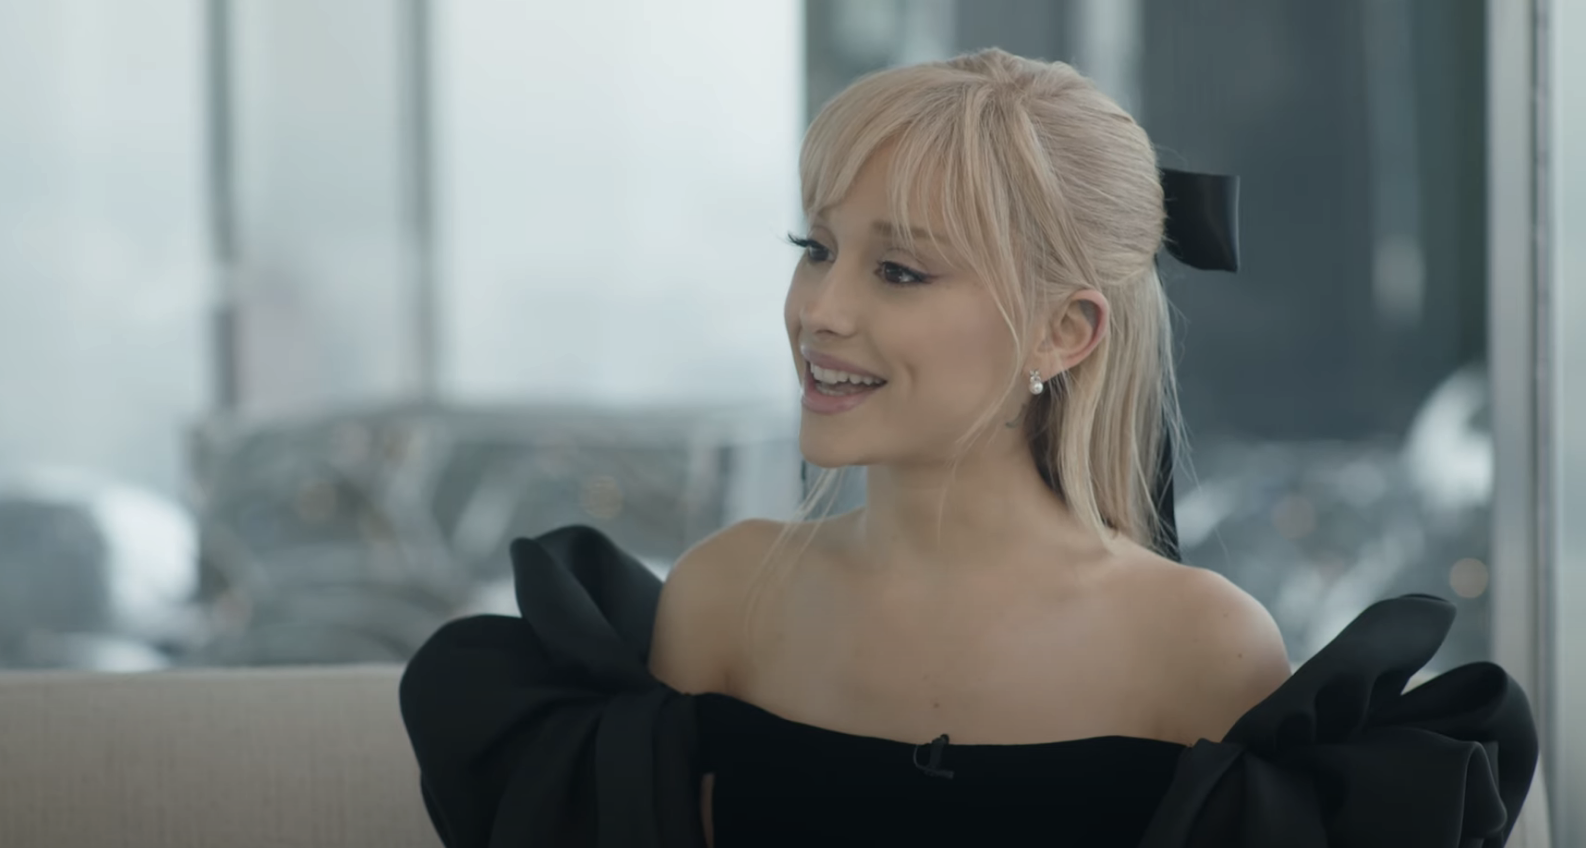 ariana in an off-shoulder dress with a bow detail, smiling and looking away